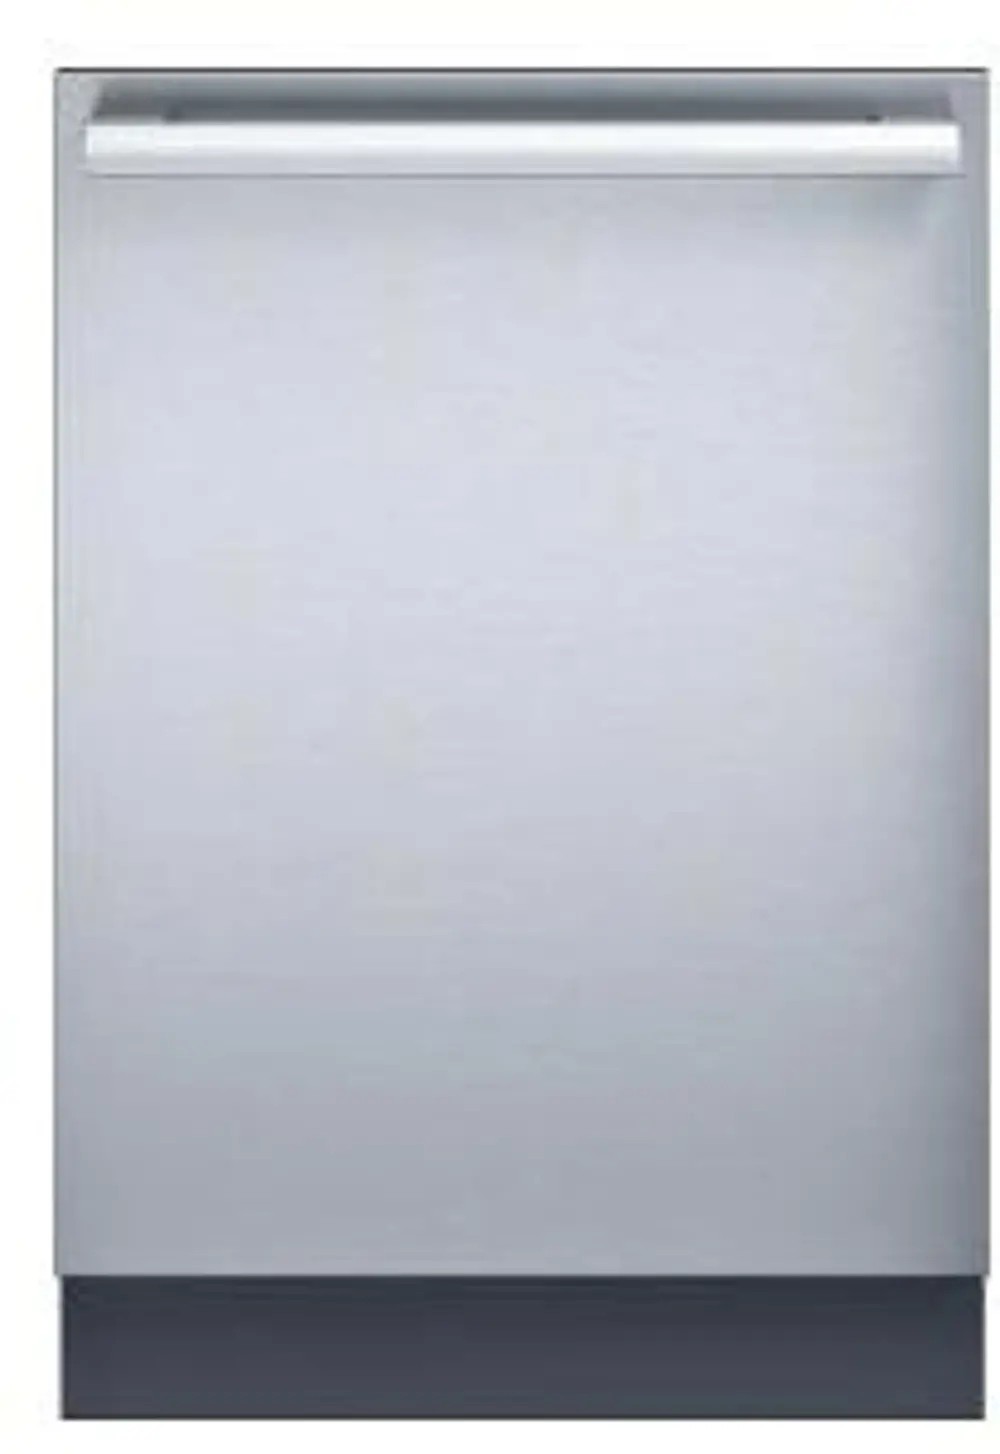 DWHD440MFM Thermador Top Control Dishwasher - Stainless Steel-1